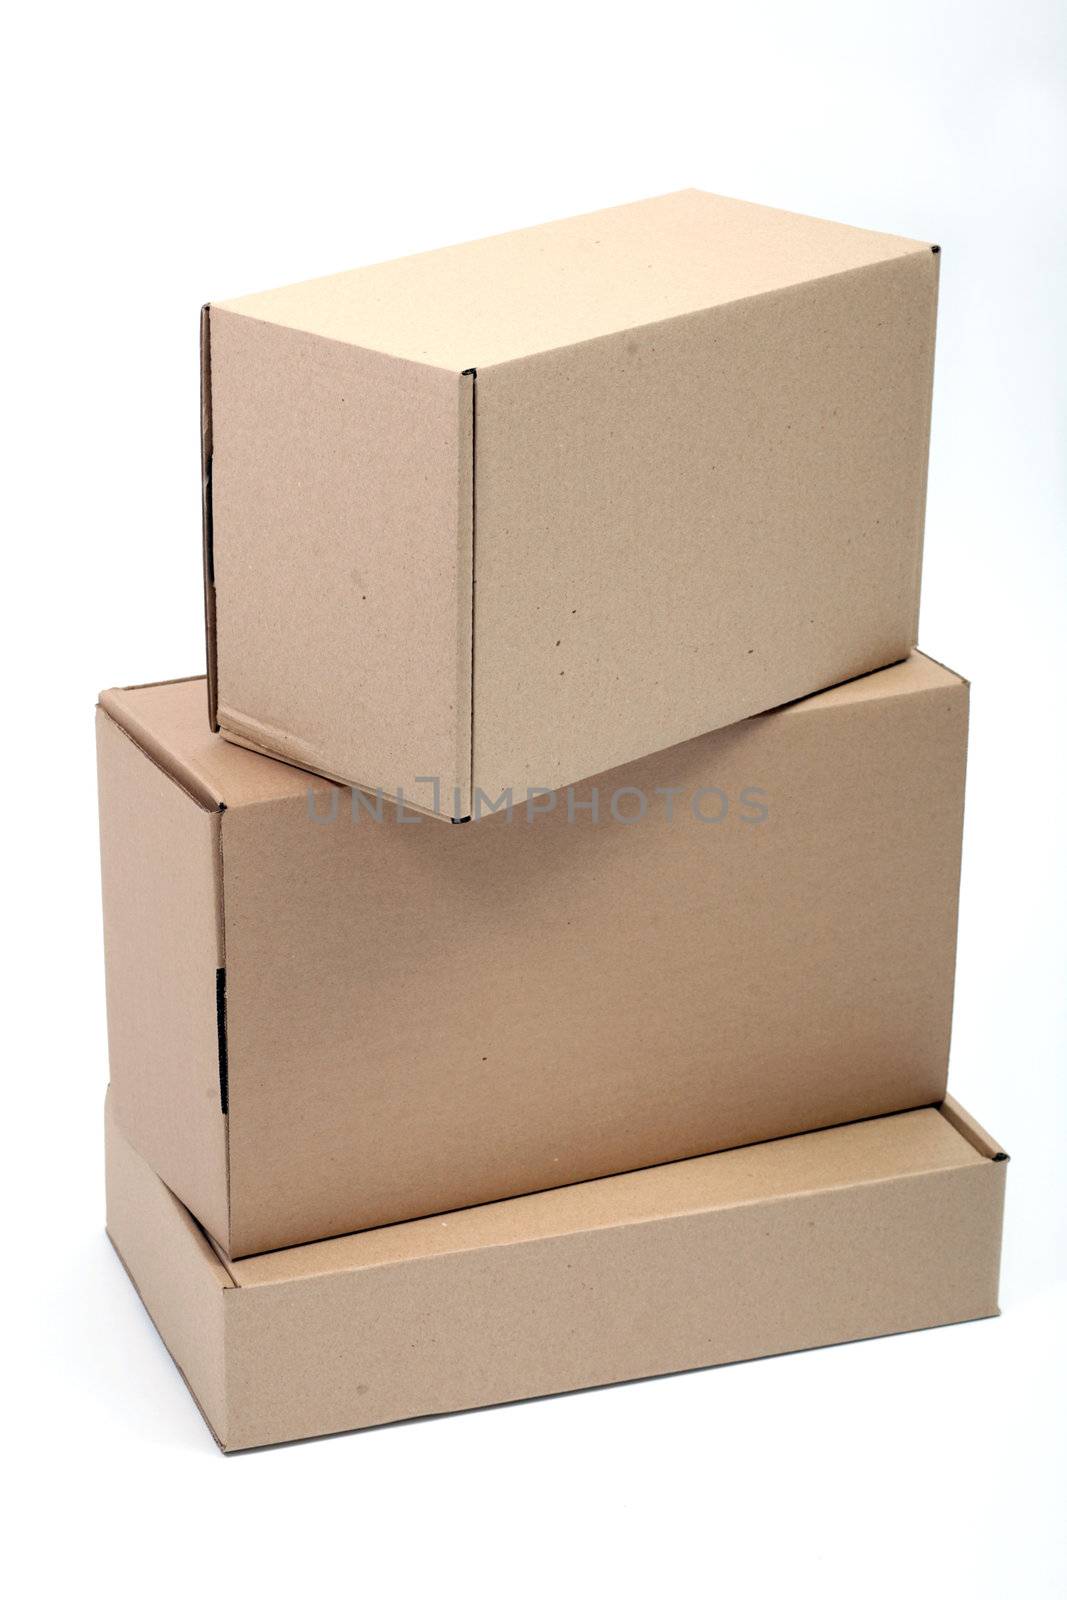 An image of three brown cardboard boxes